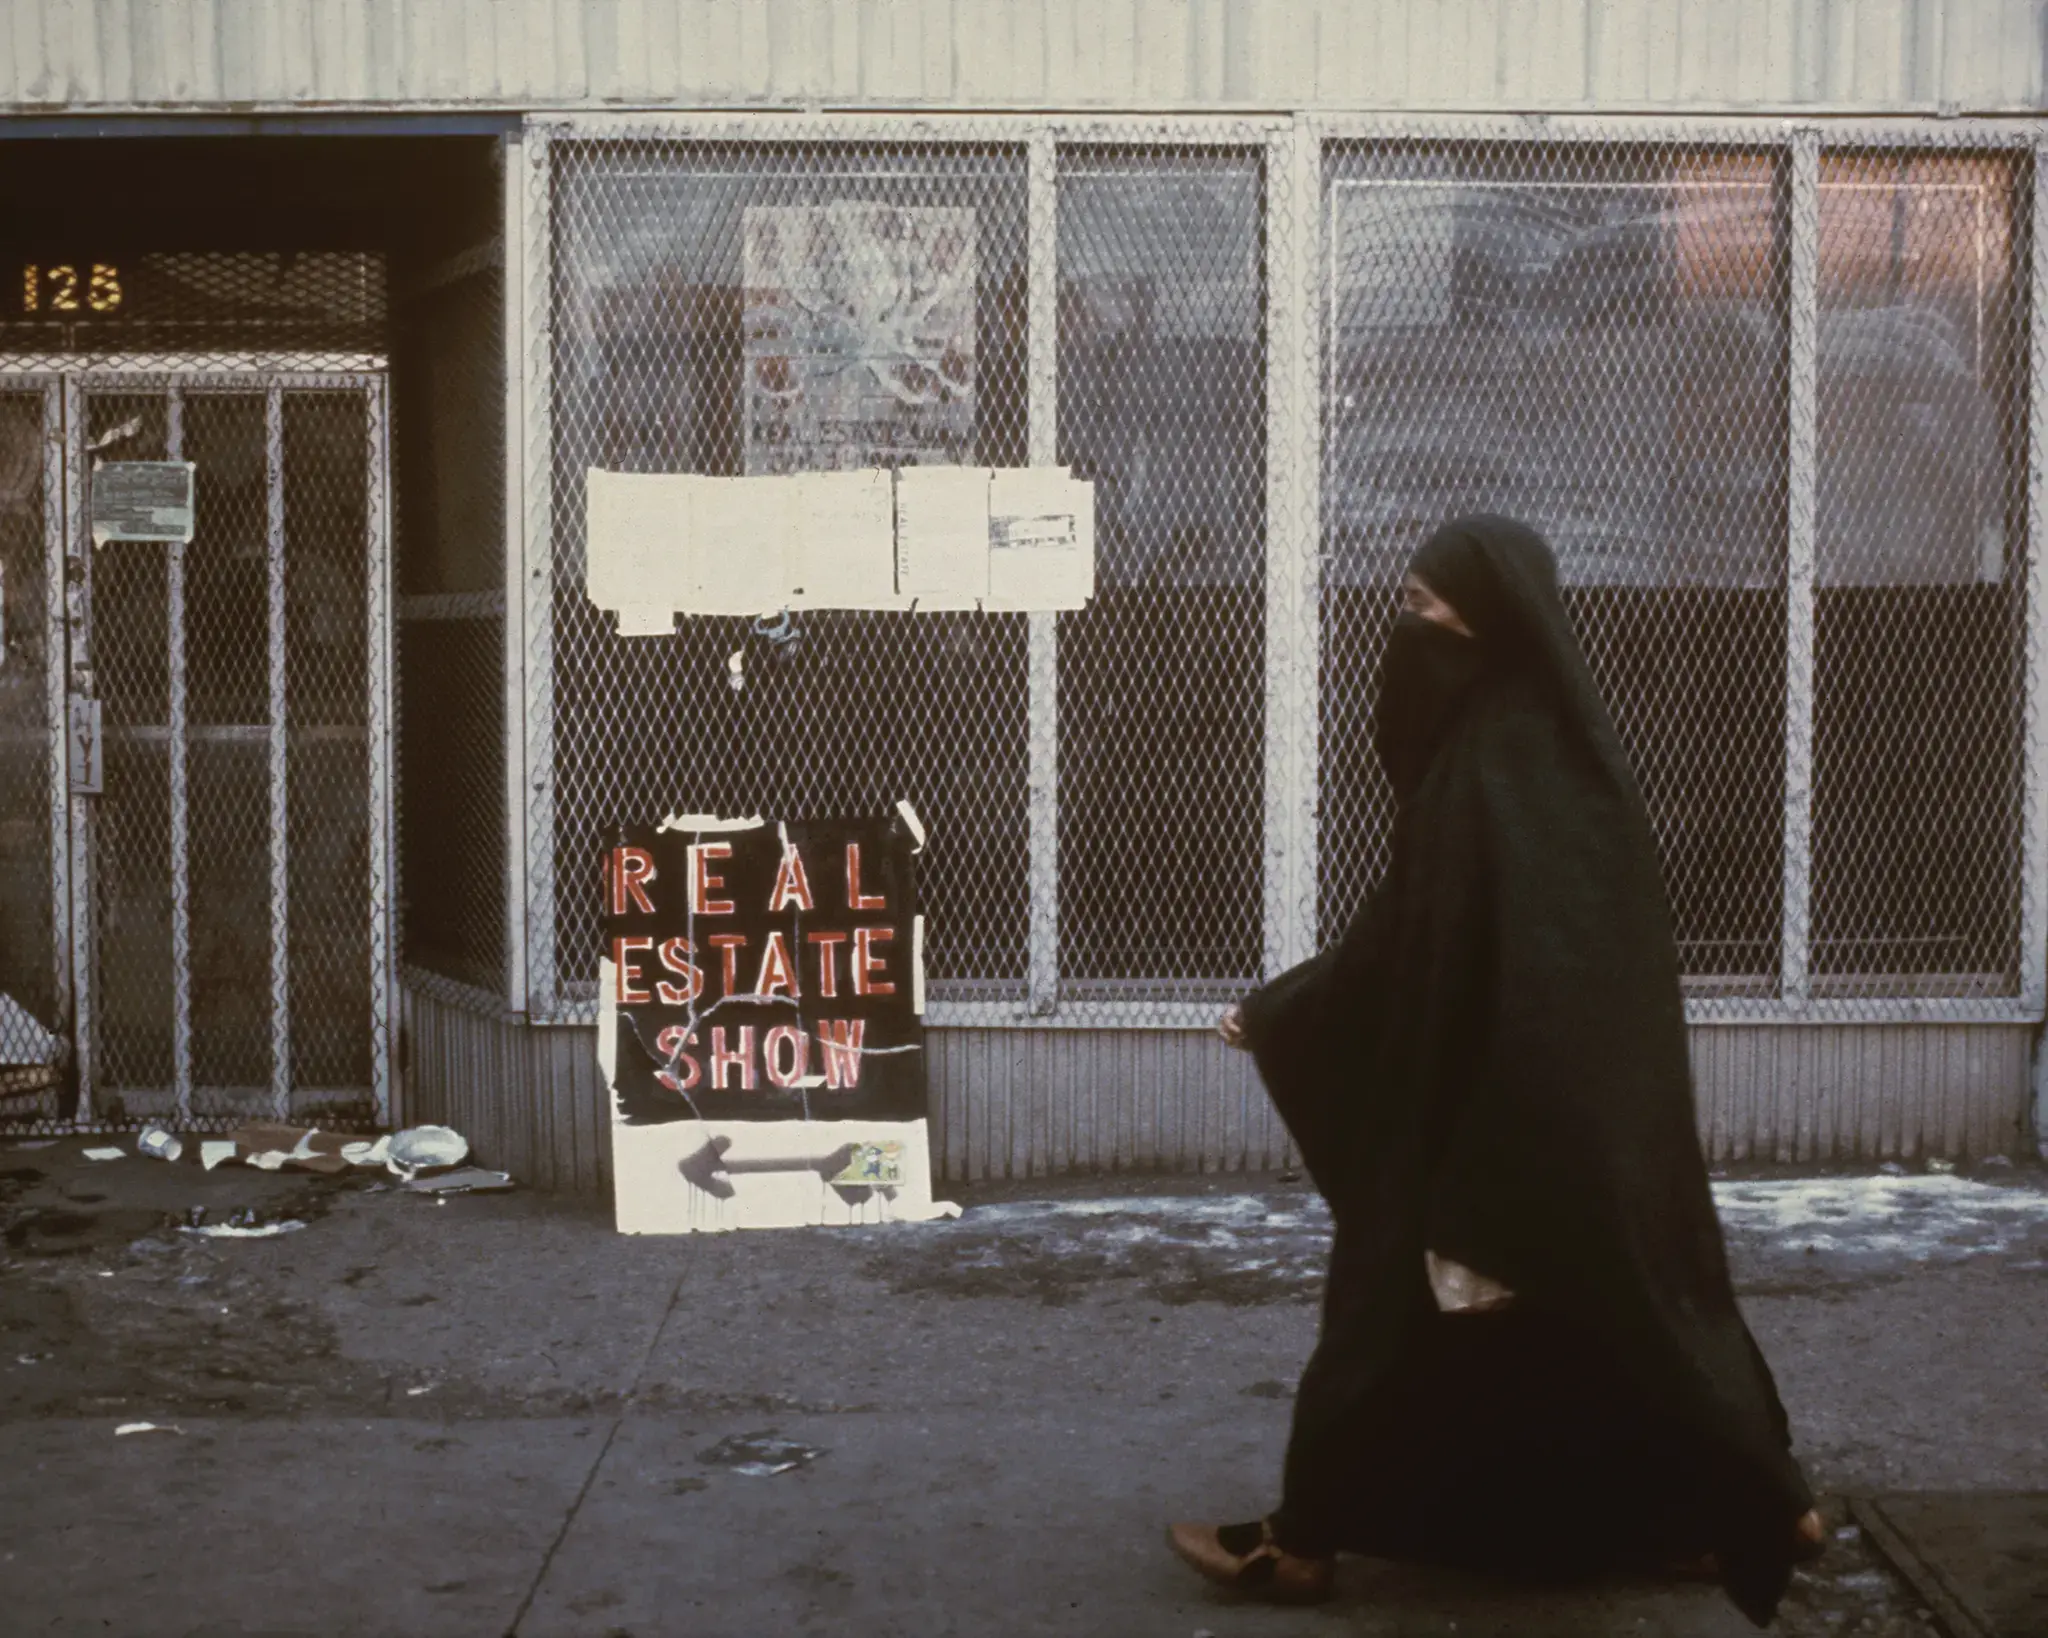 Passerby at 125 Delancey Street, site of The Real Estate Show. Photo by Anne Messner.